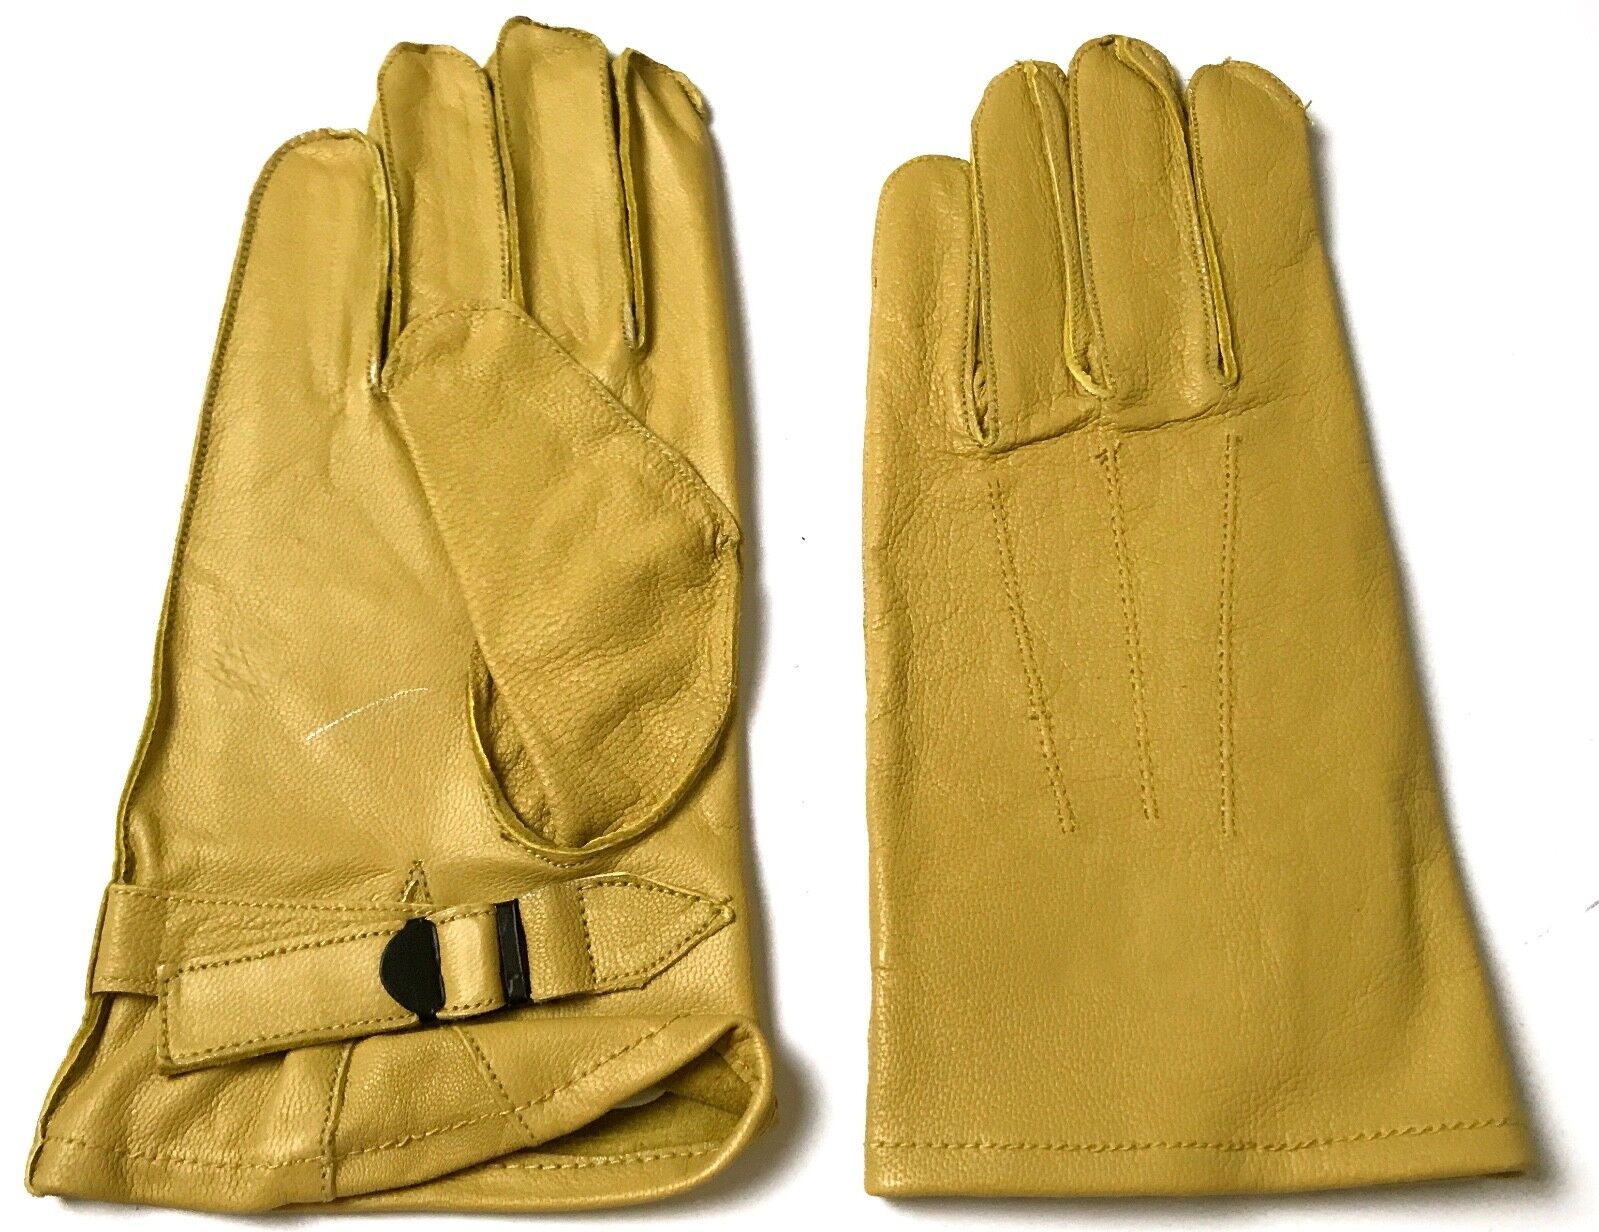 WWII US ARMY AIRBORNE PARATROOPER DDAY LEATHER JUMP GLOVES-SIZE XLARGE